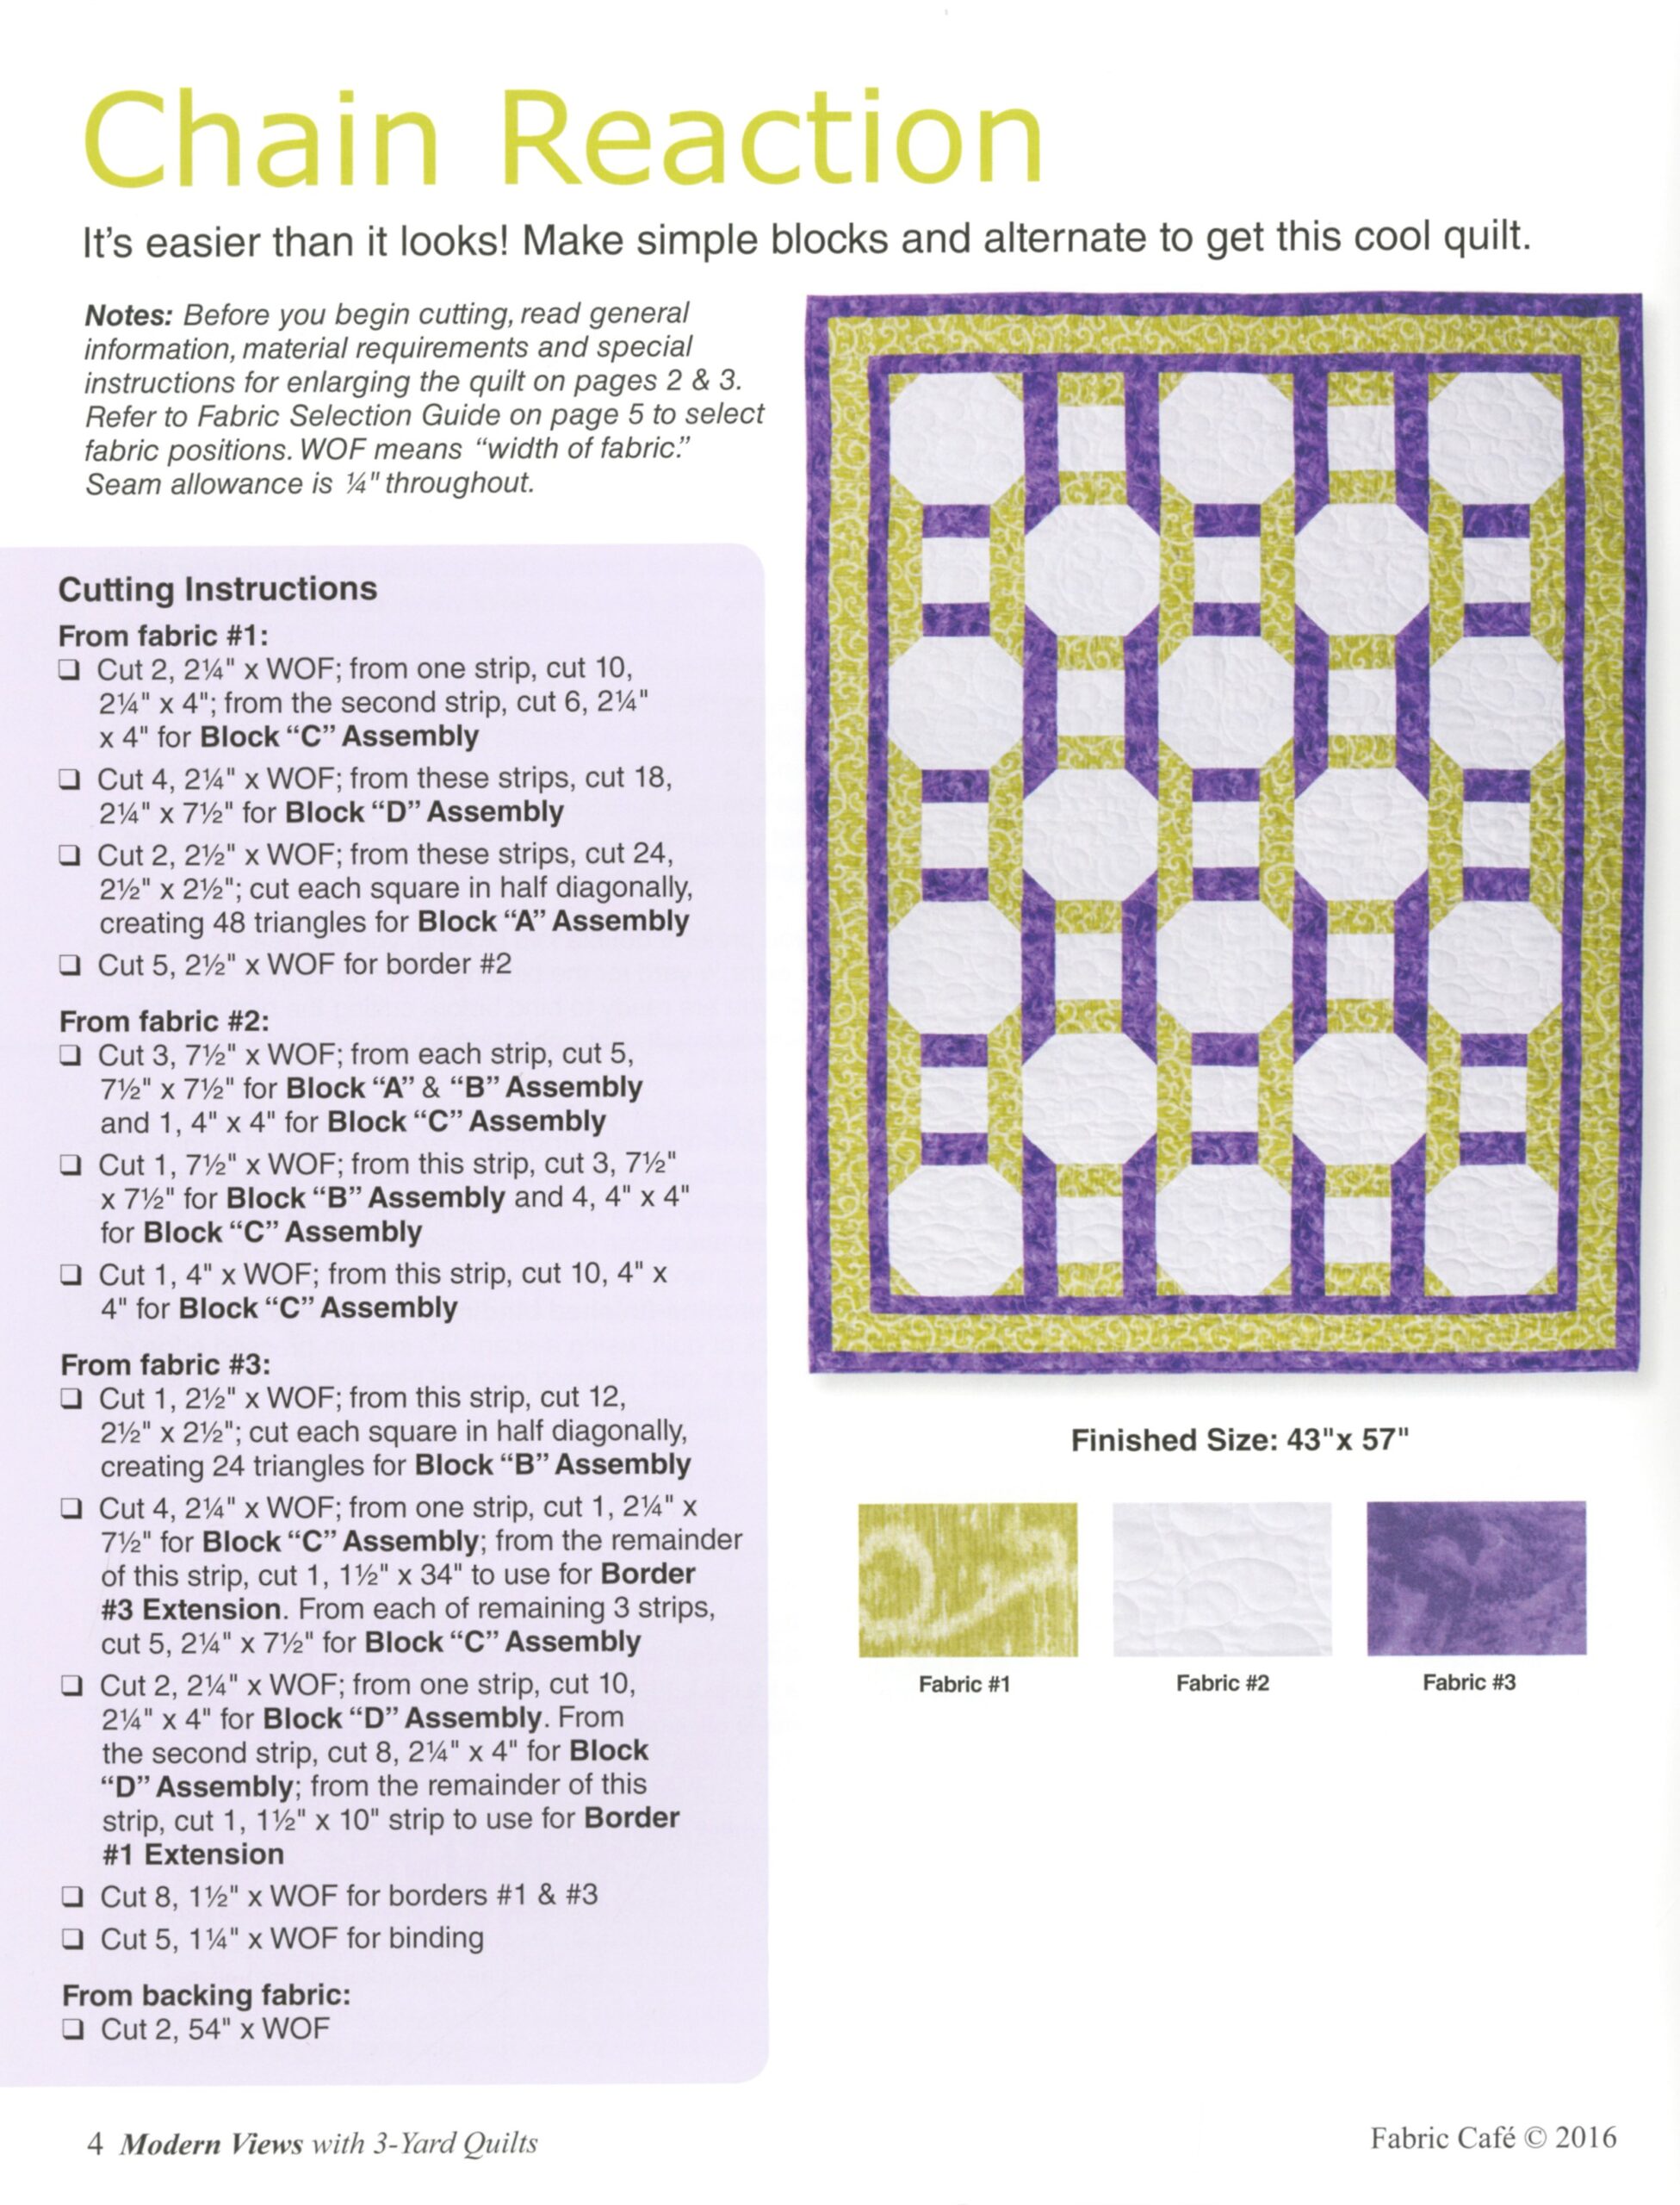 Fabric Café Tutorials - A Guide to the 3-Yard Quilting Method